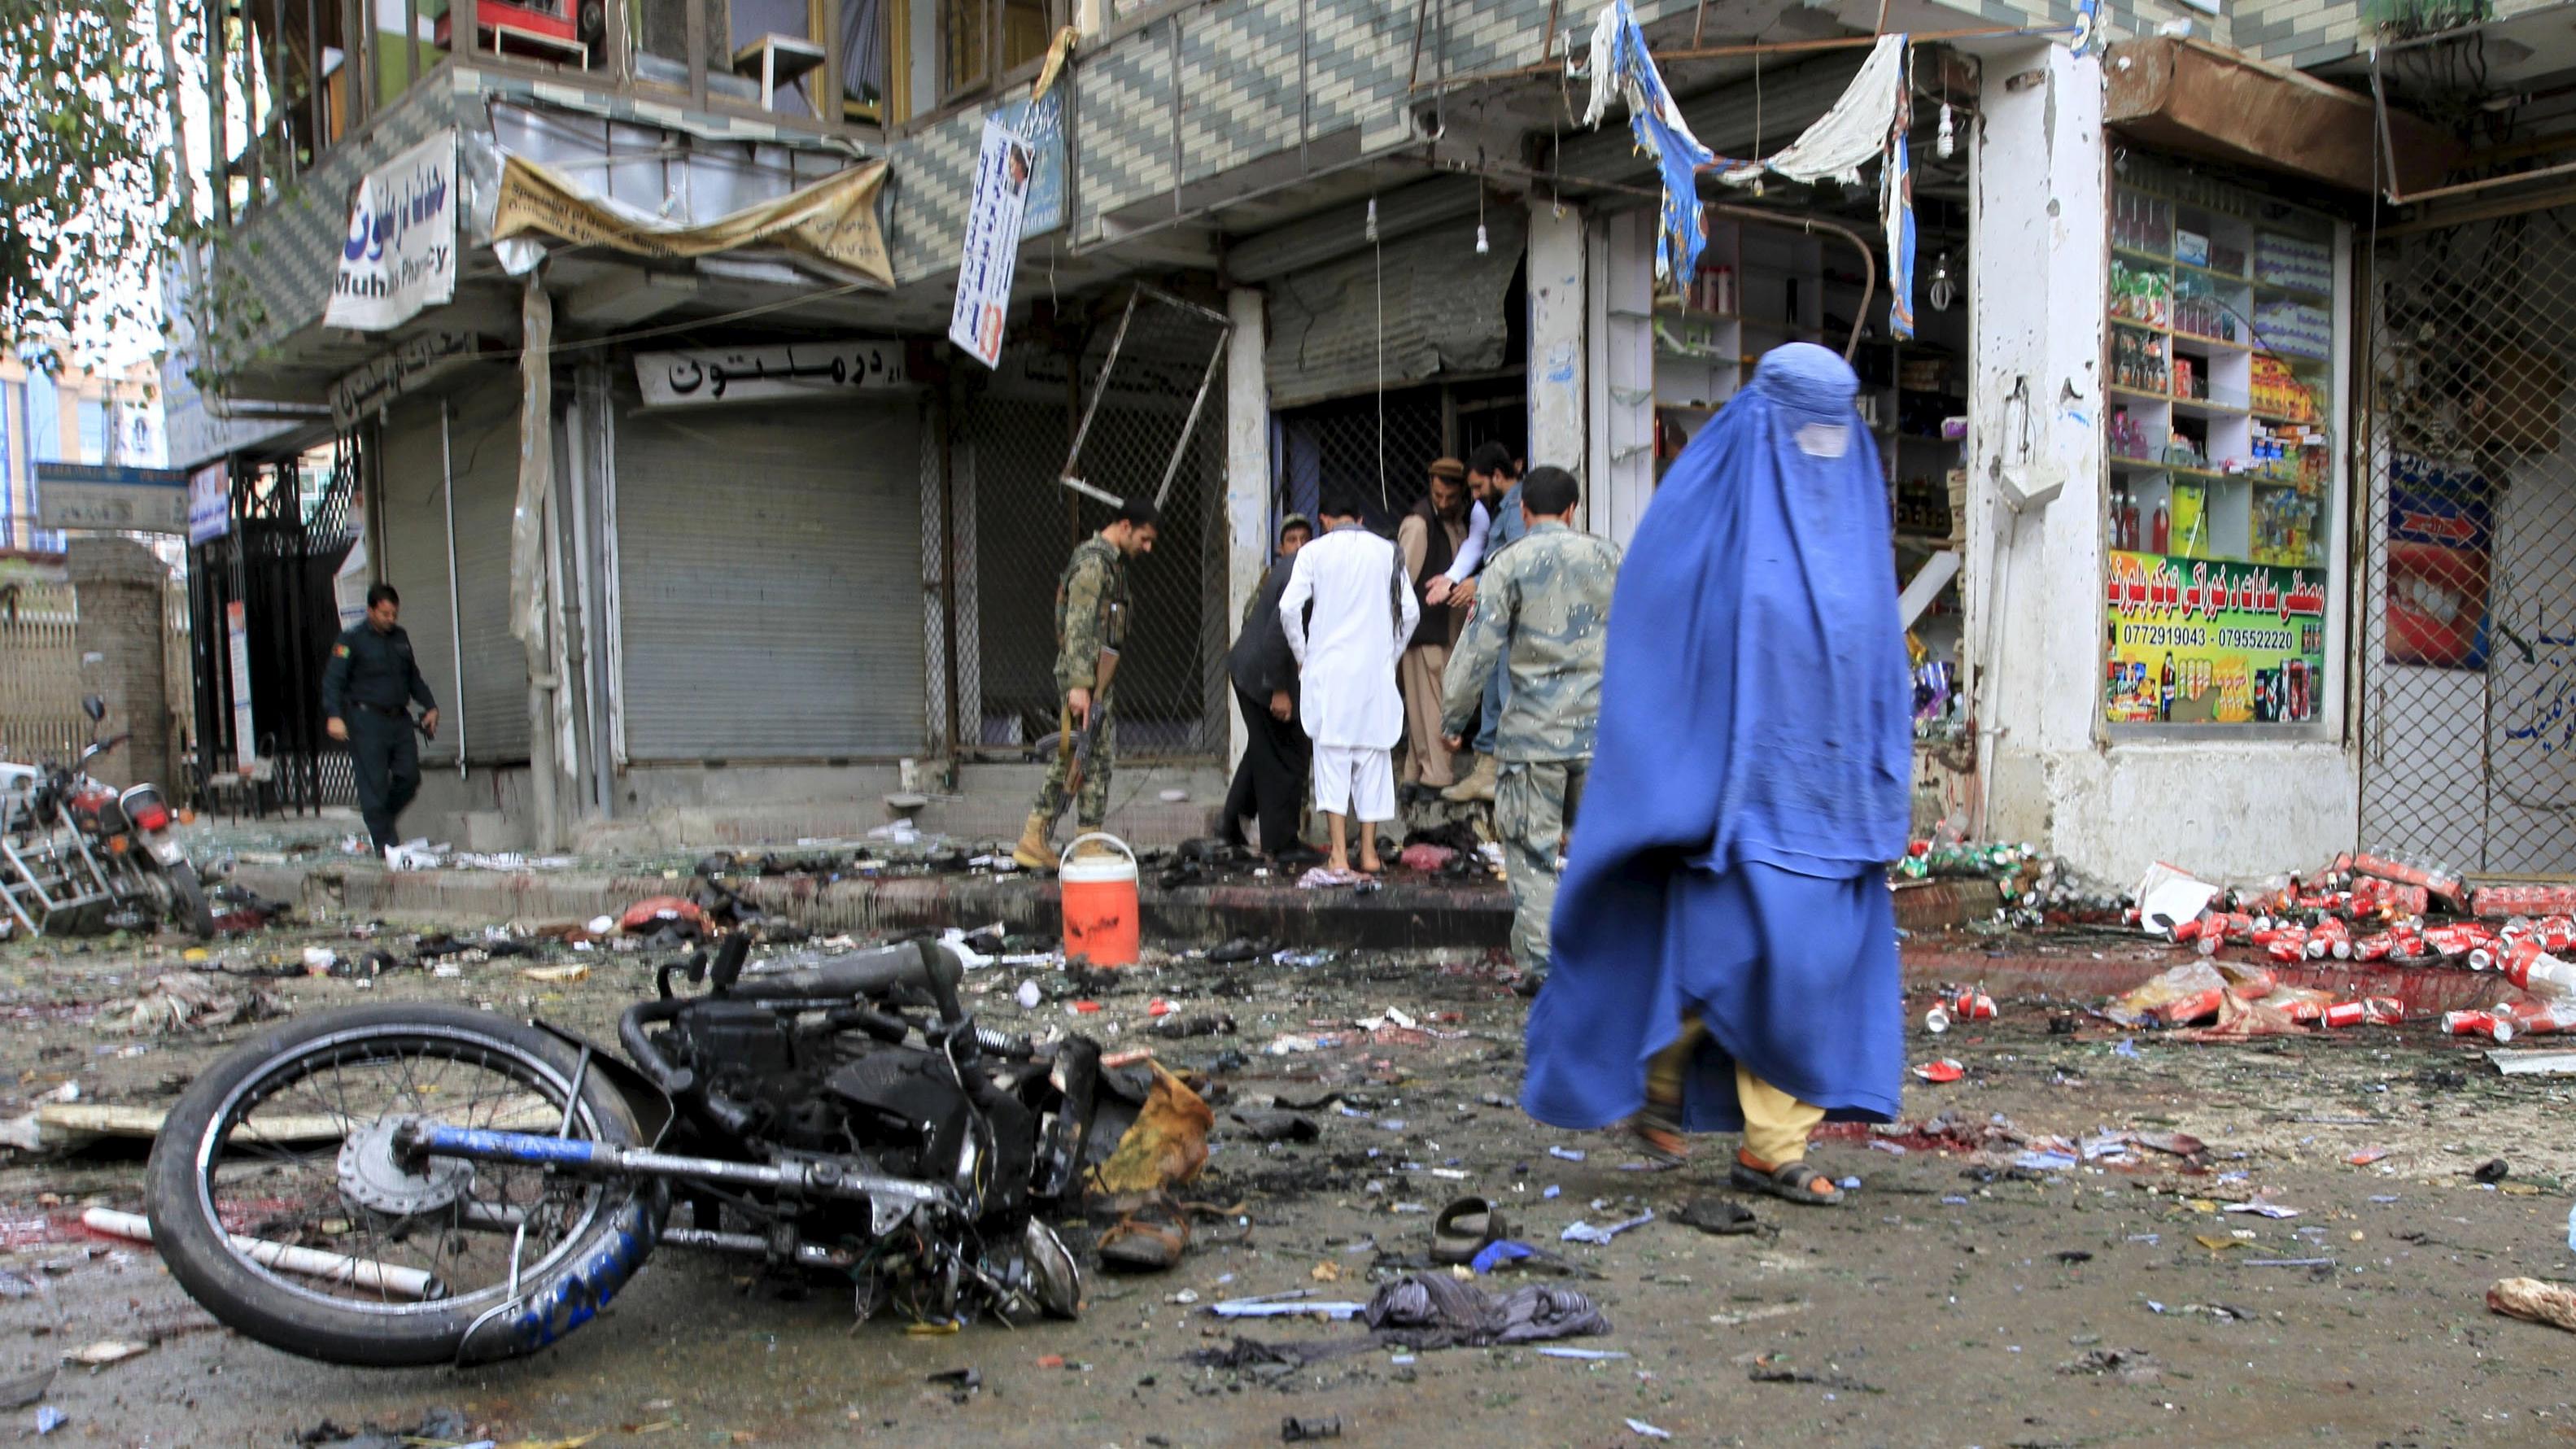 An Afghan woman walks at the site of a suicide attack in Jalalabad April 18, 2015. The suicide bomb blast in Afghanistan's eastern city of Jalalabad occurred outside a bank where government workers collect salaries, the city's police chief said on Saturday.